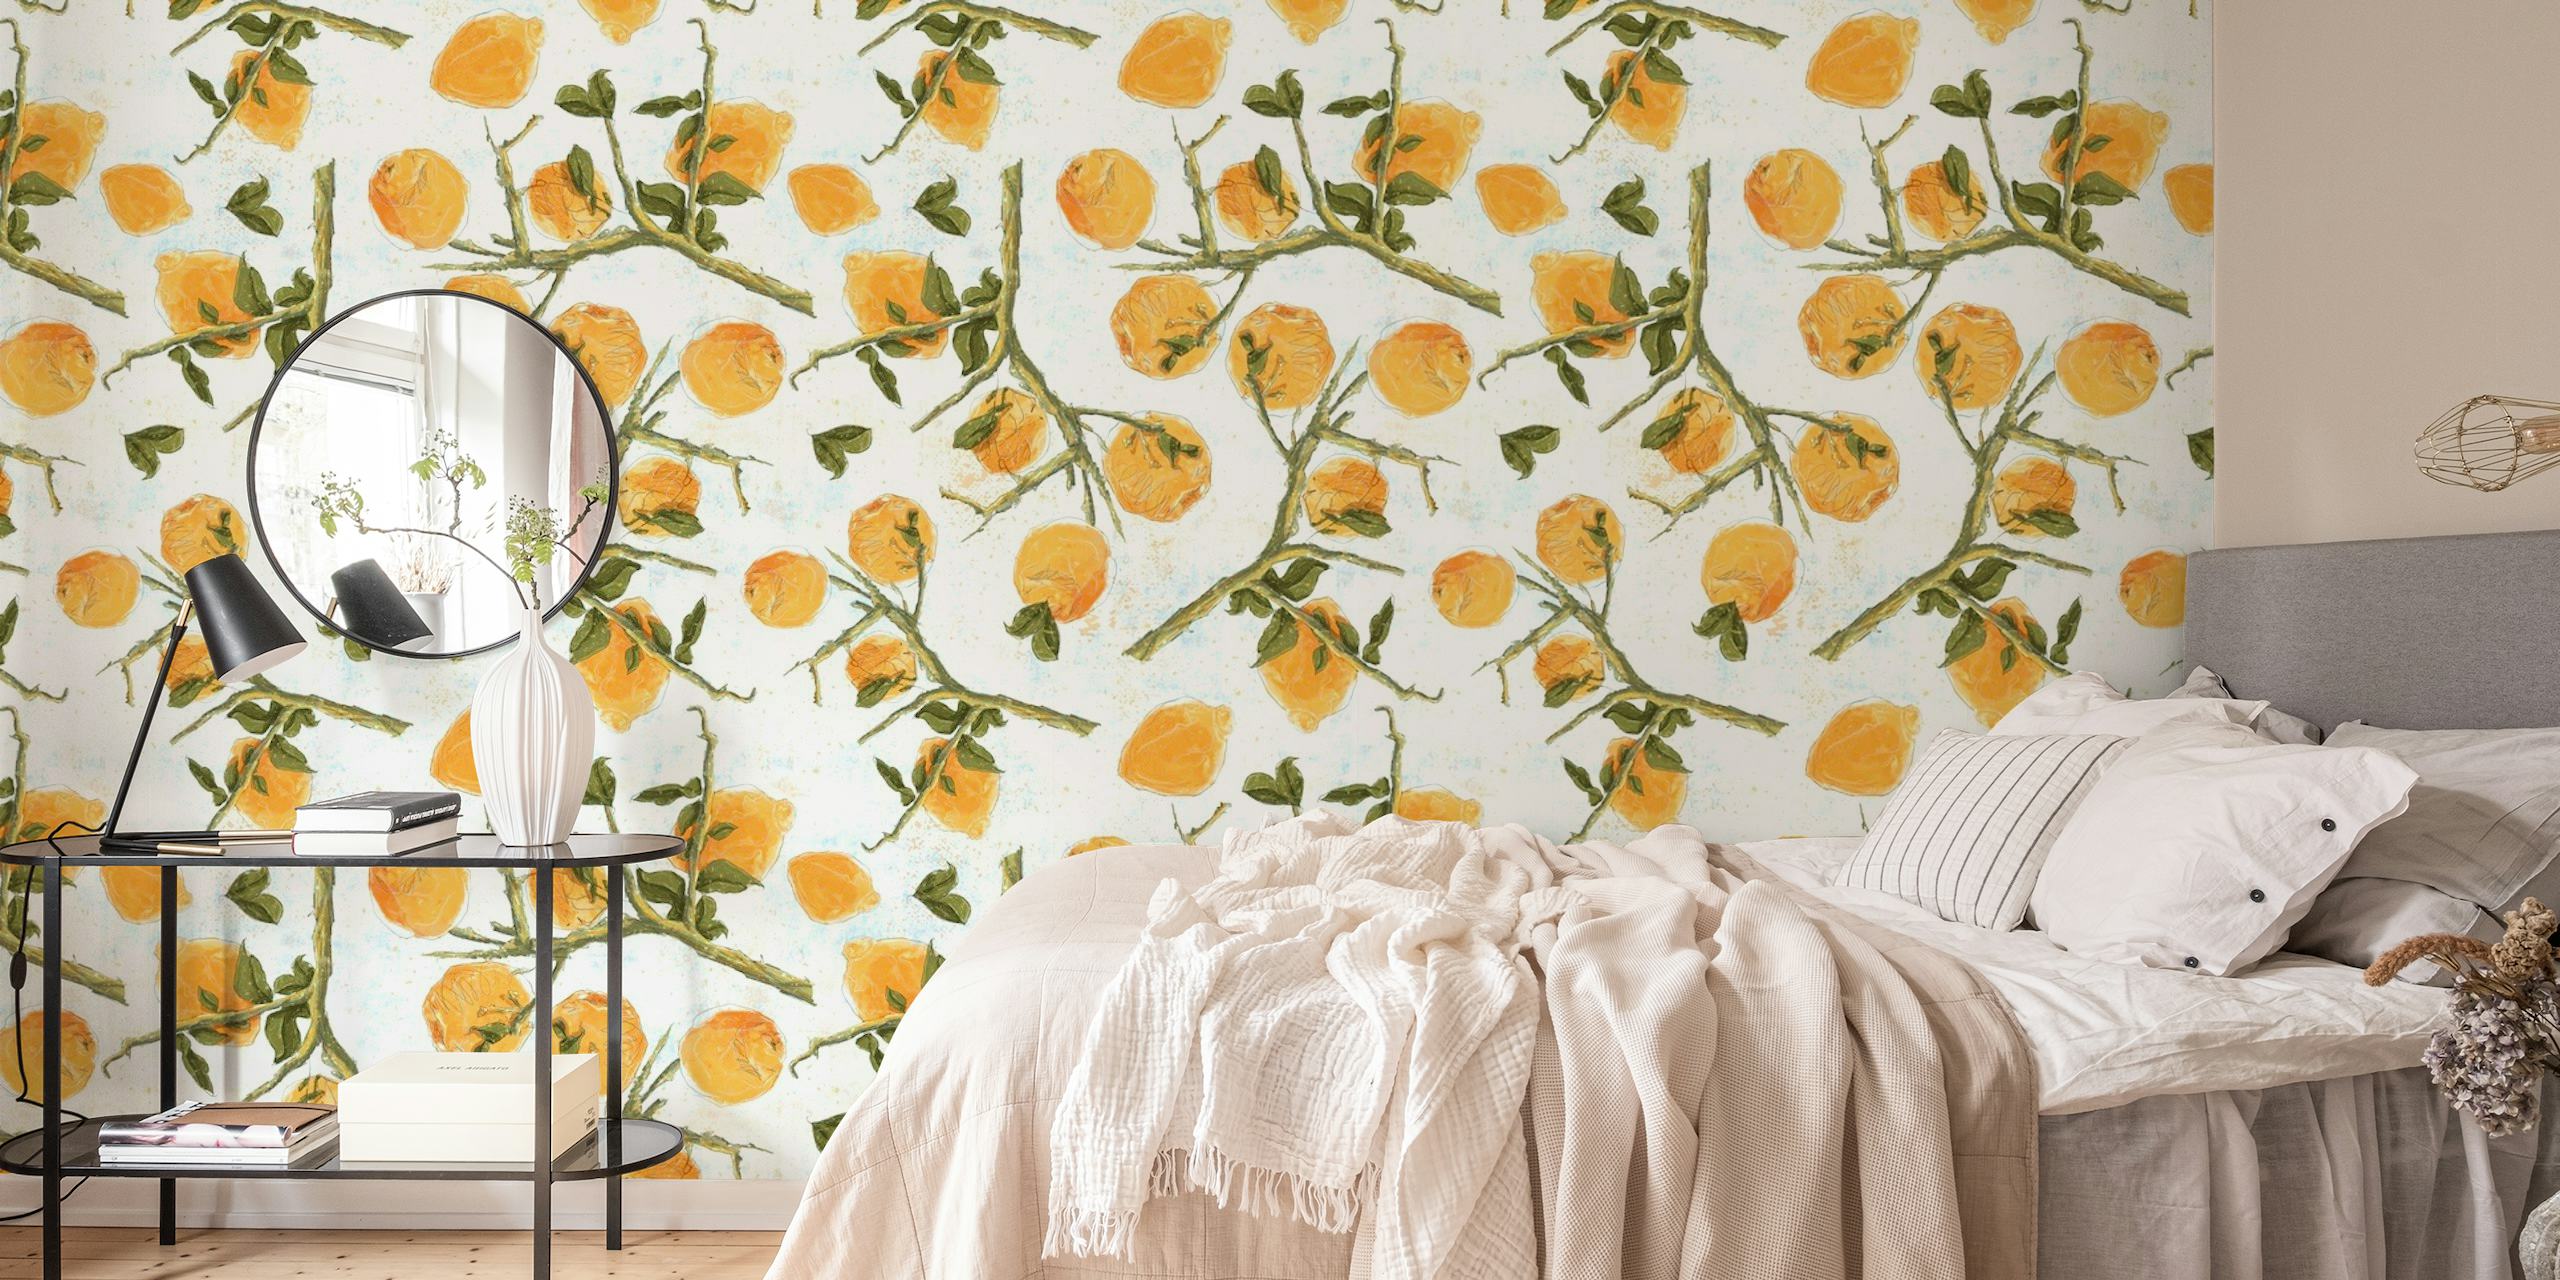 Lemons on White wall mural with illustrated citrus fruits and green leaves